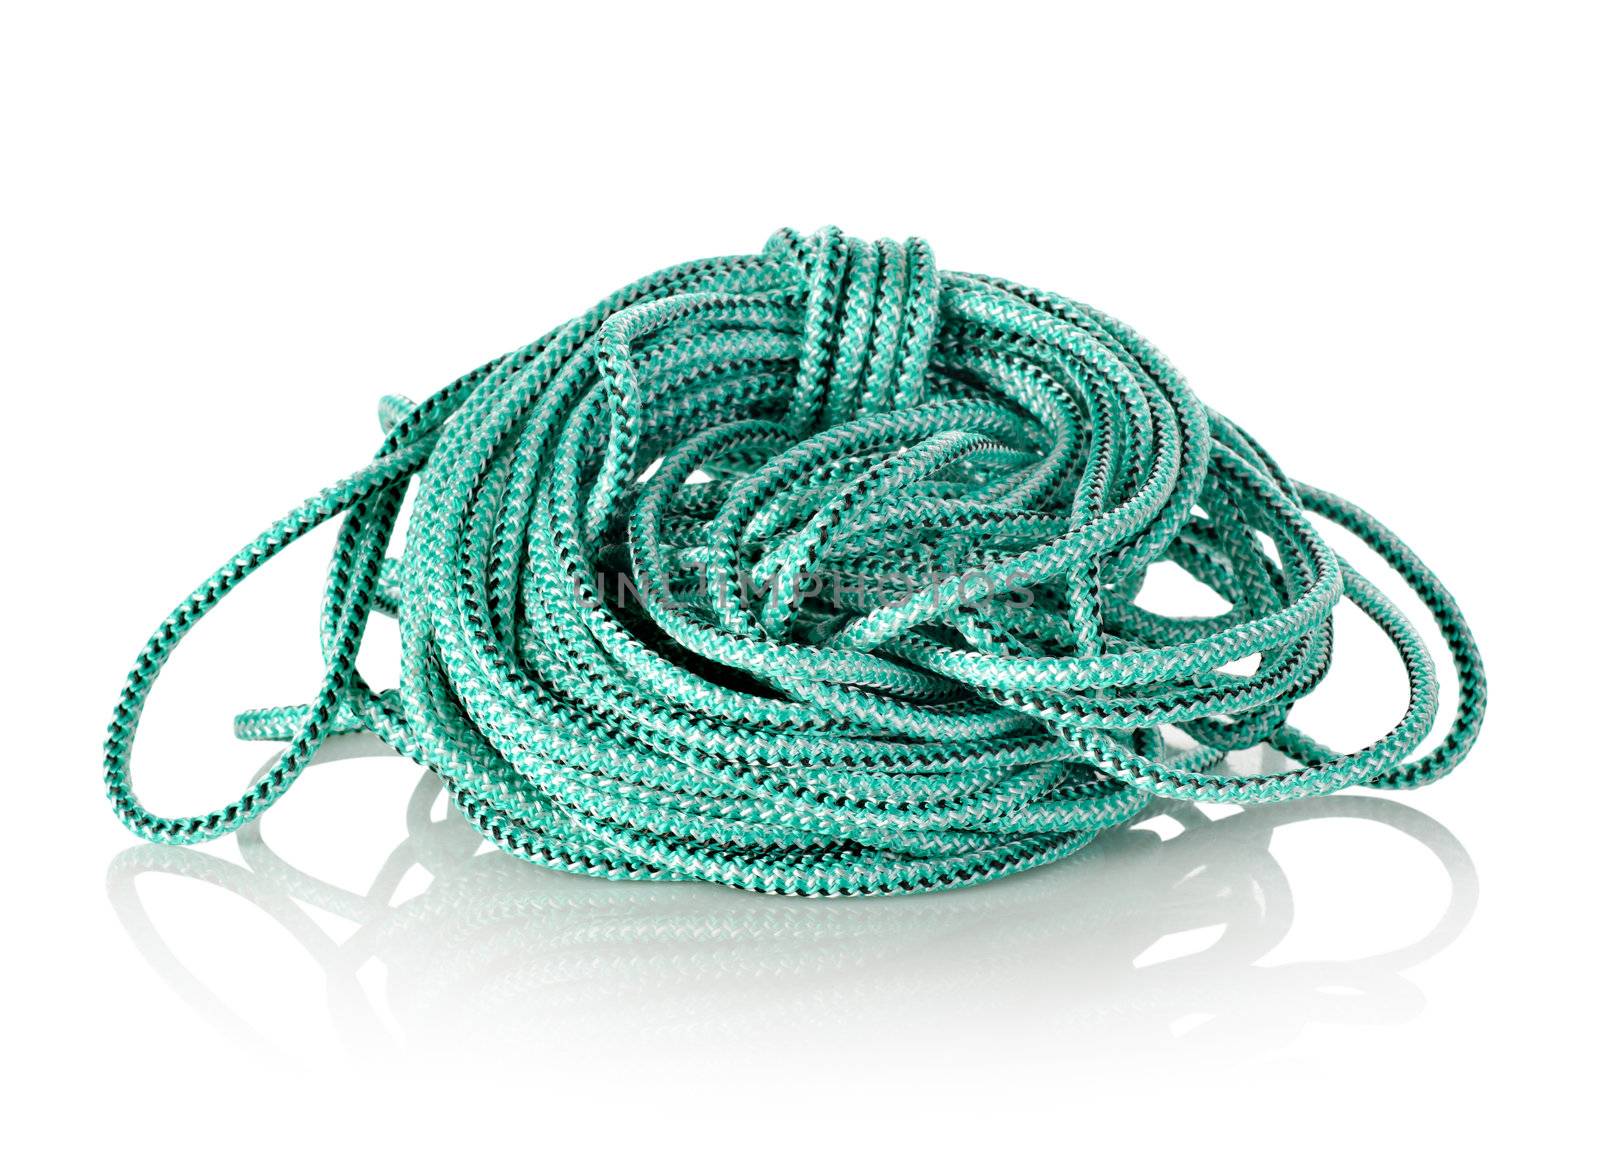 Green rope isolated on a white background